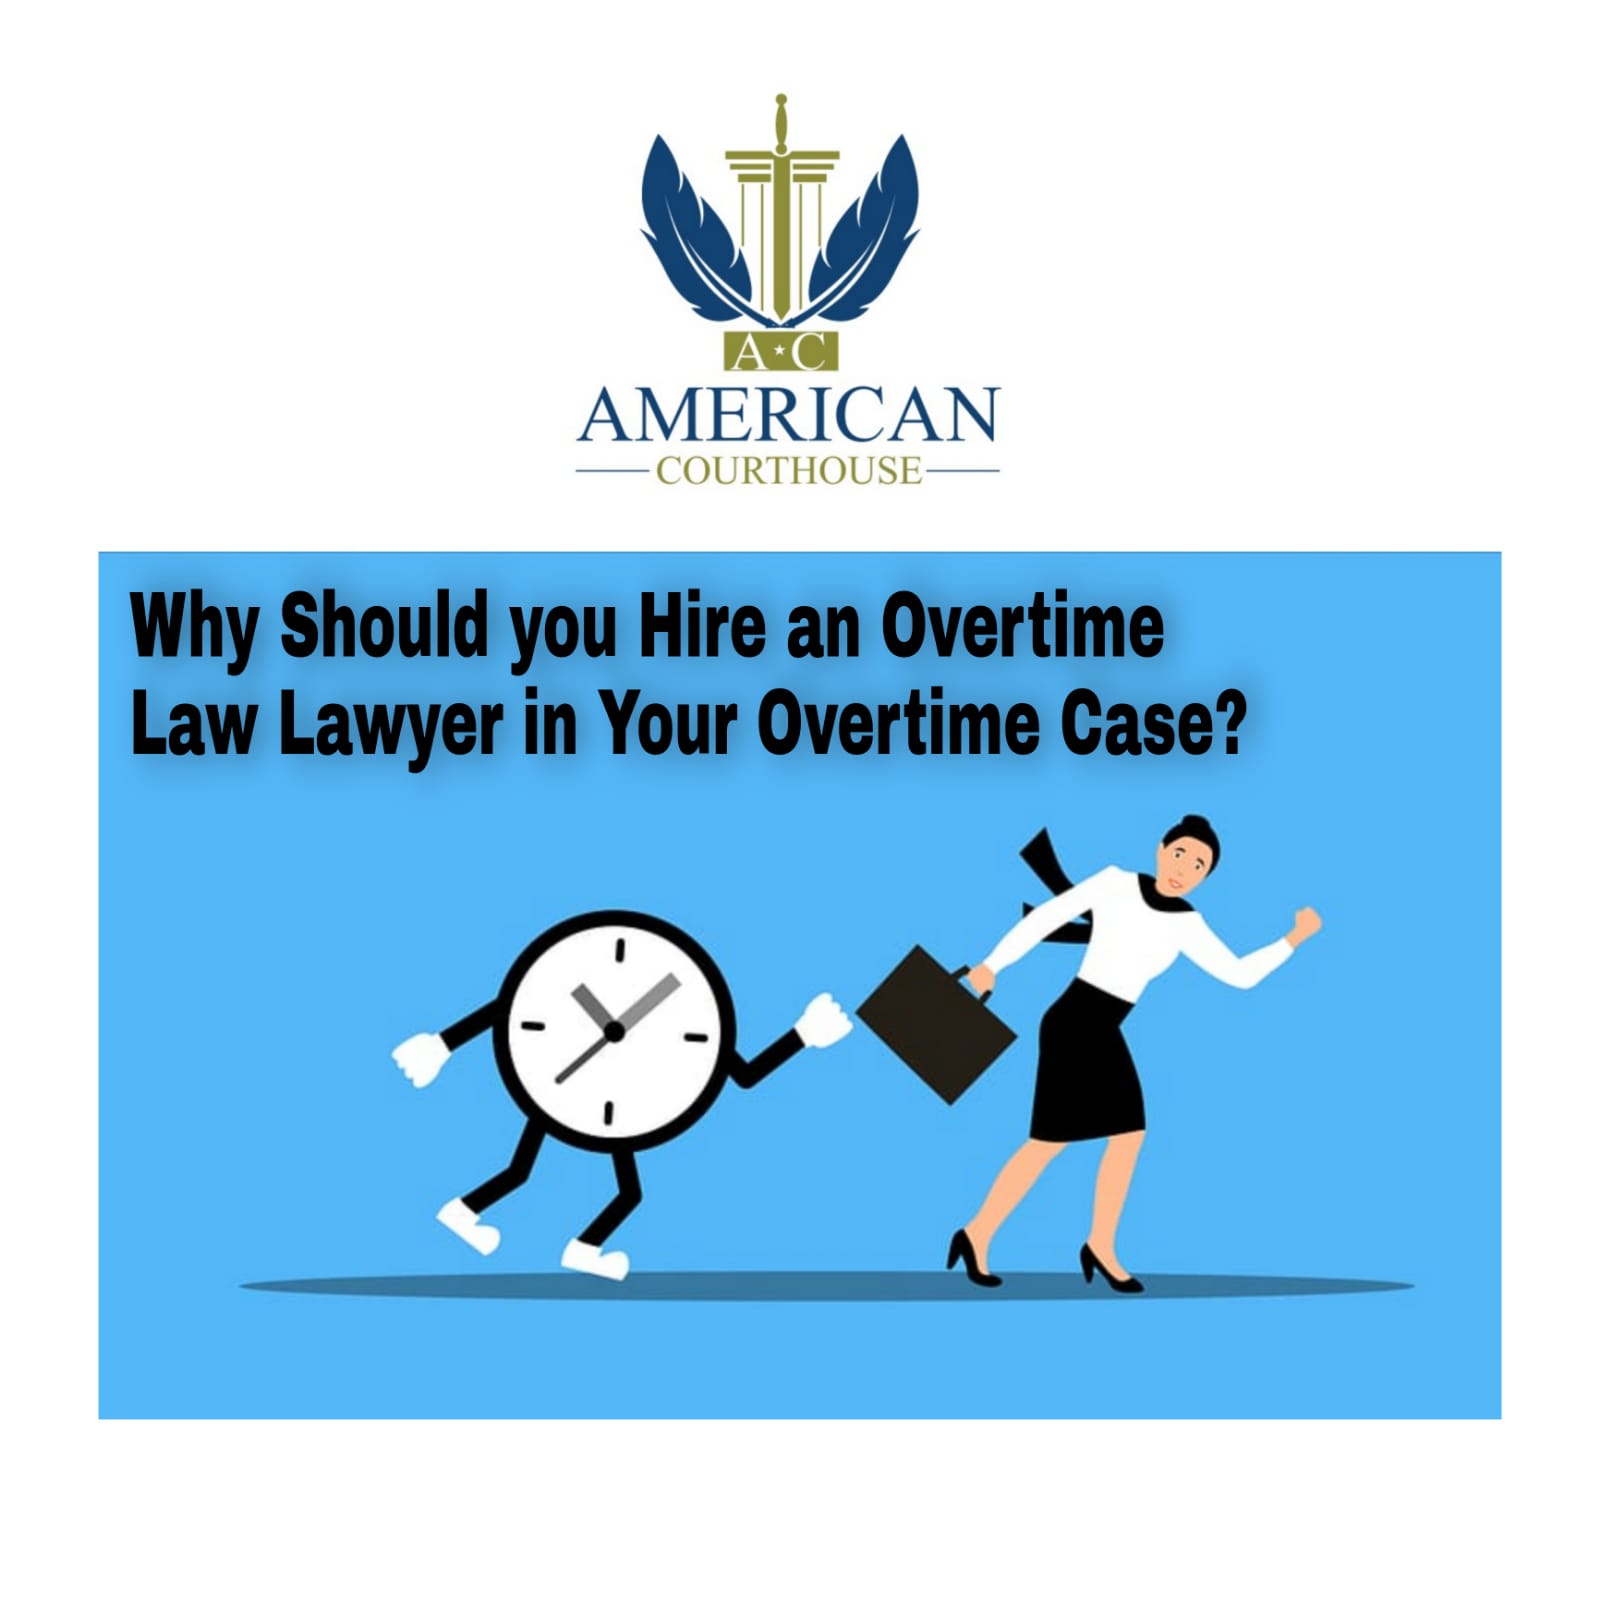 Why Should You Hire an Overtime Law Lawyer in Your Overtime Case